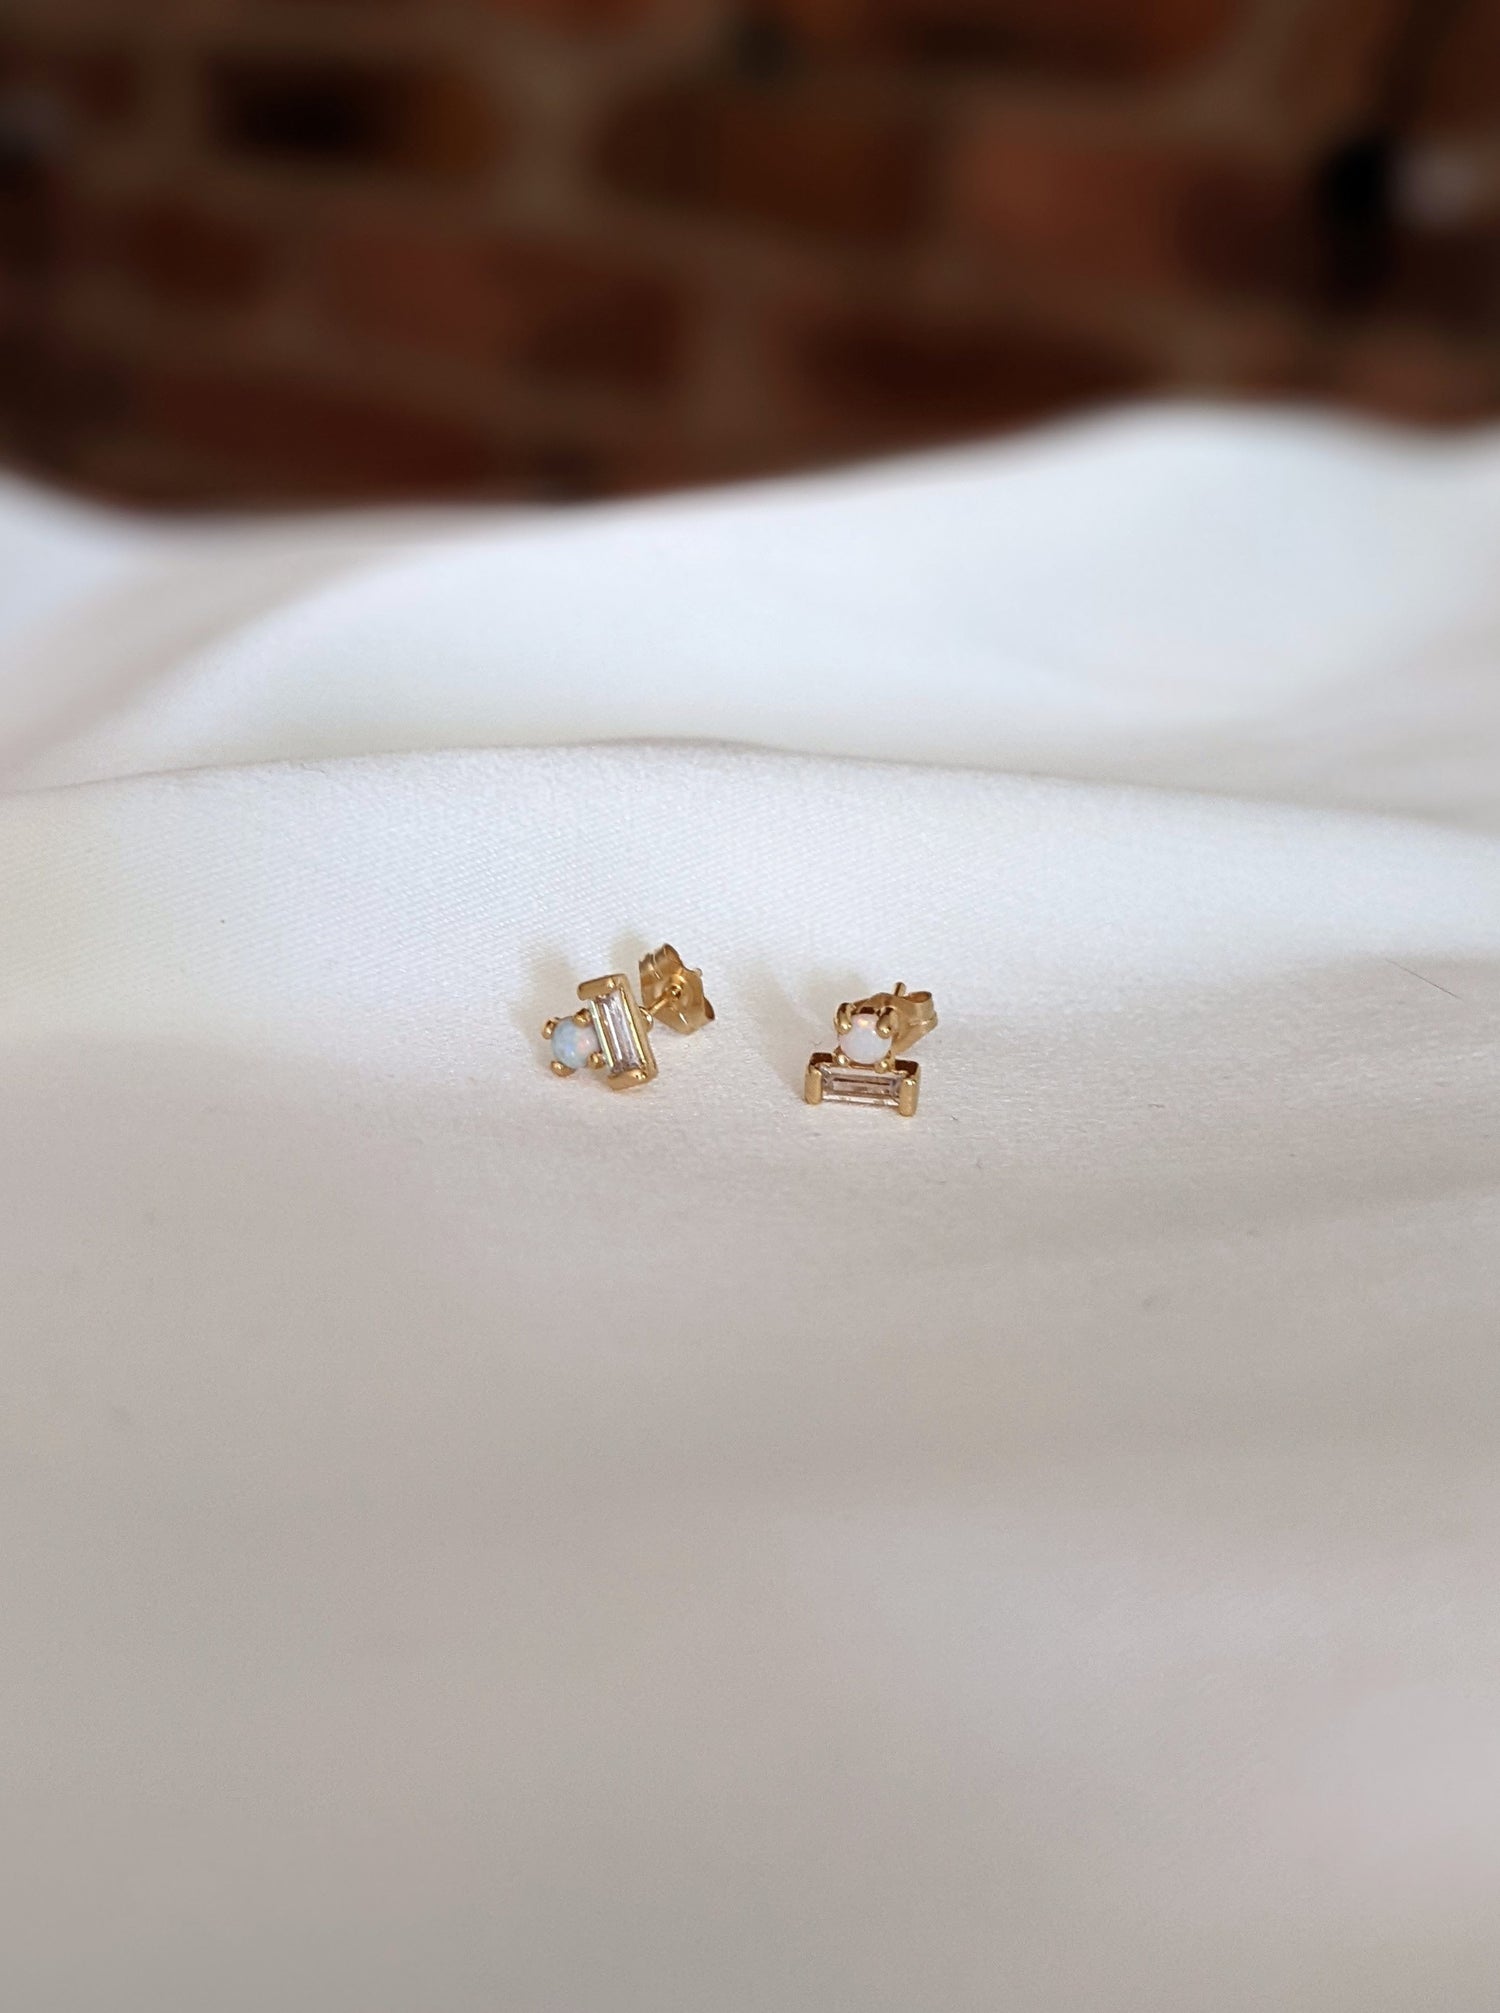 Opal Baguette Studs Layer the Love